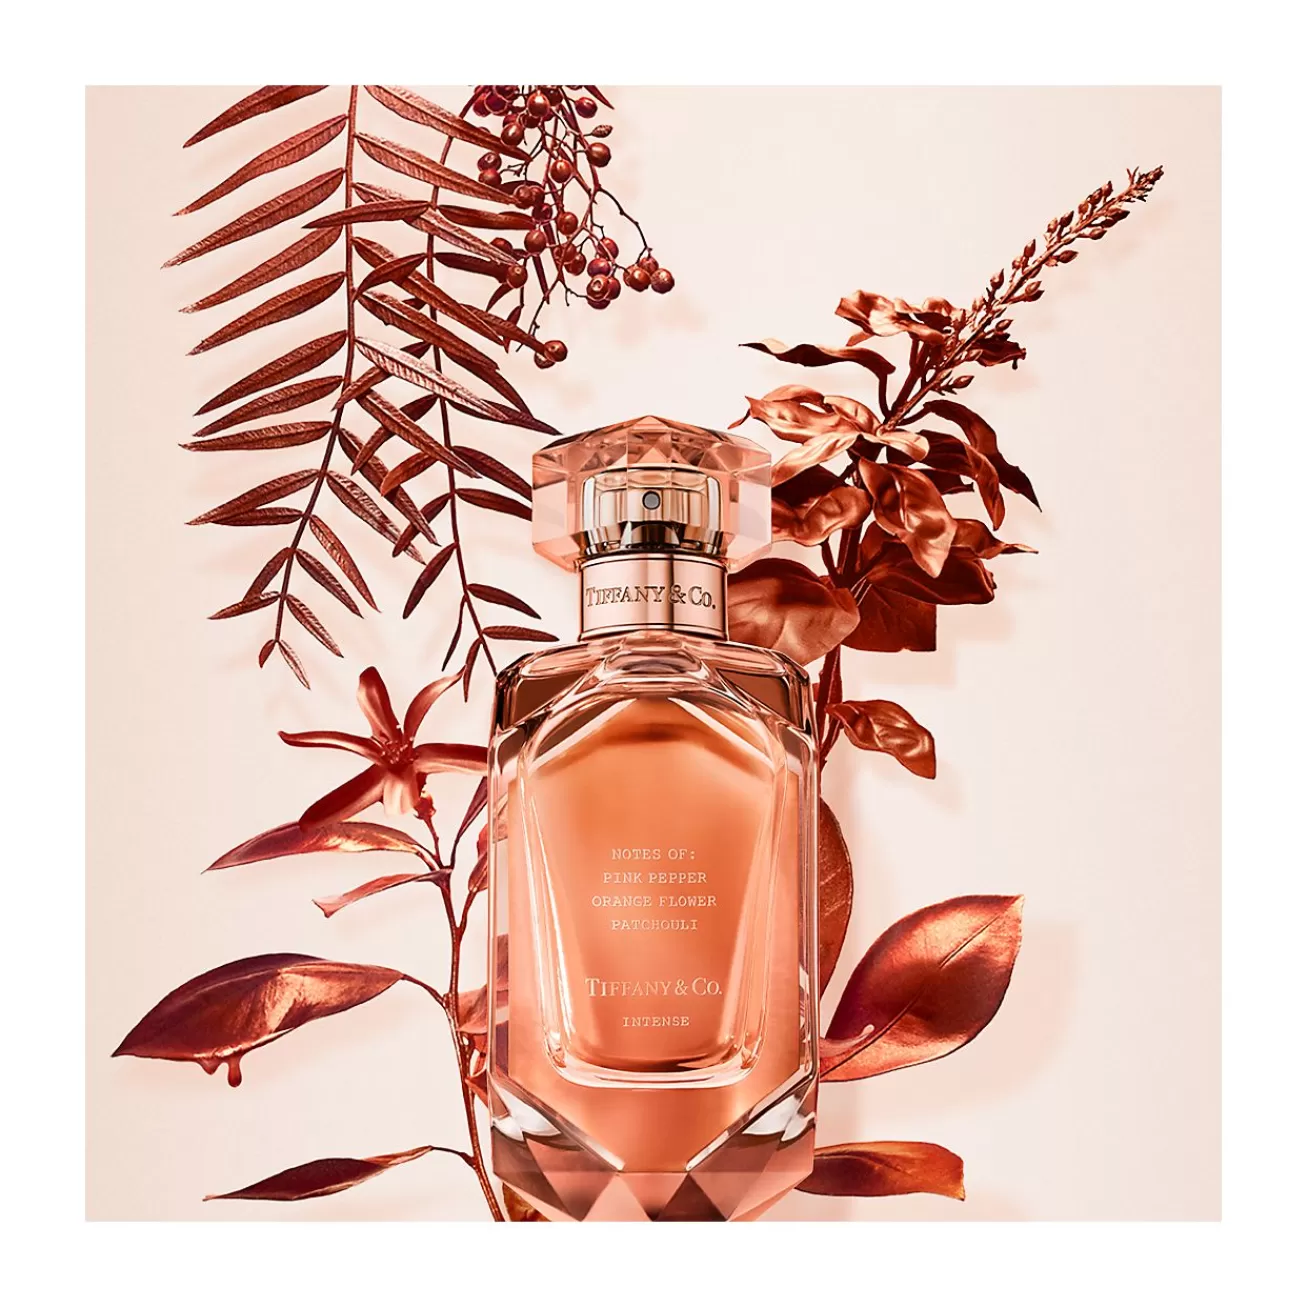 Tiffany & Co. Rose Gold Intense Eau de Parfum | ^ Gifts $1,500 & Under | Gifts to Personalize